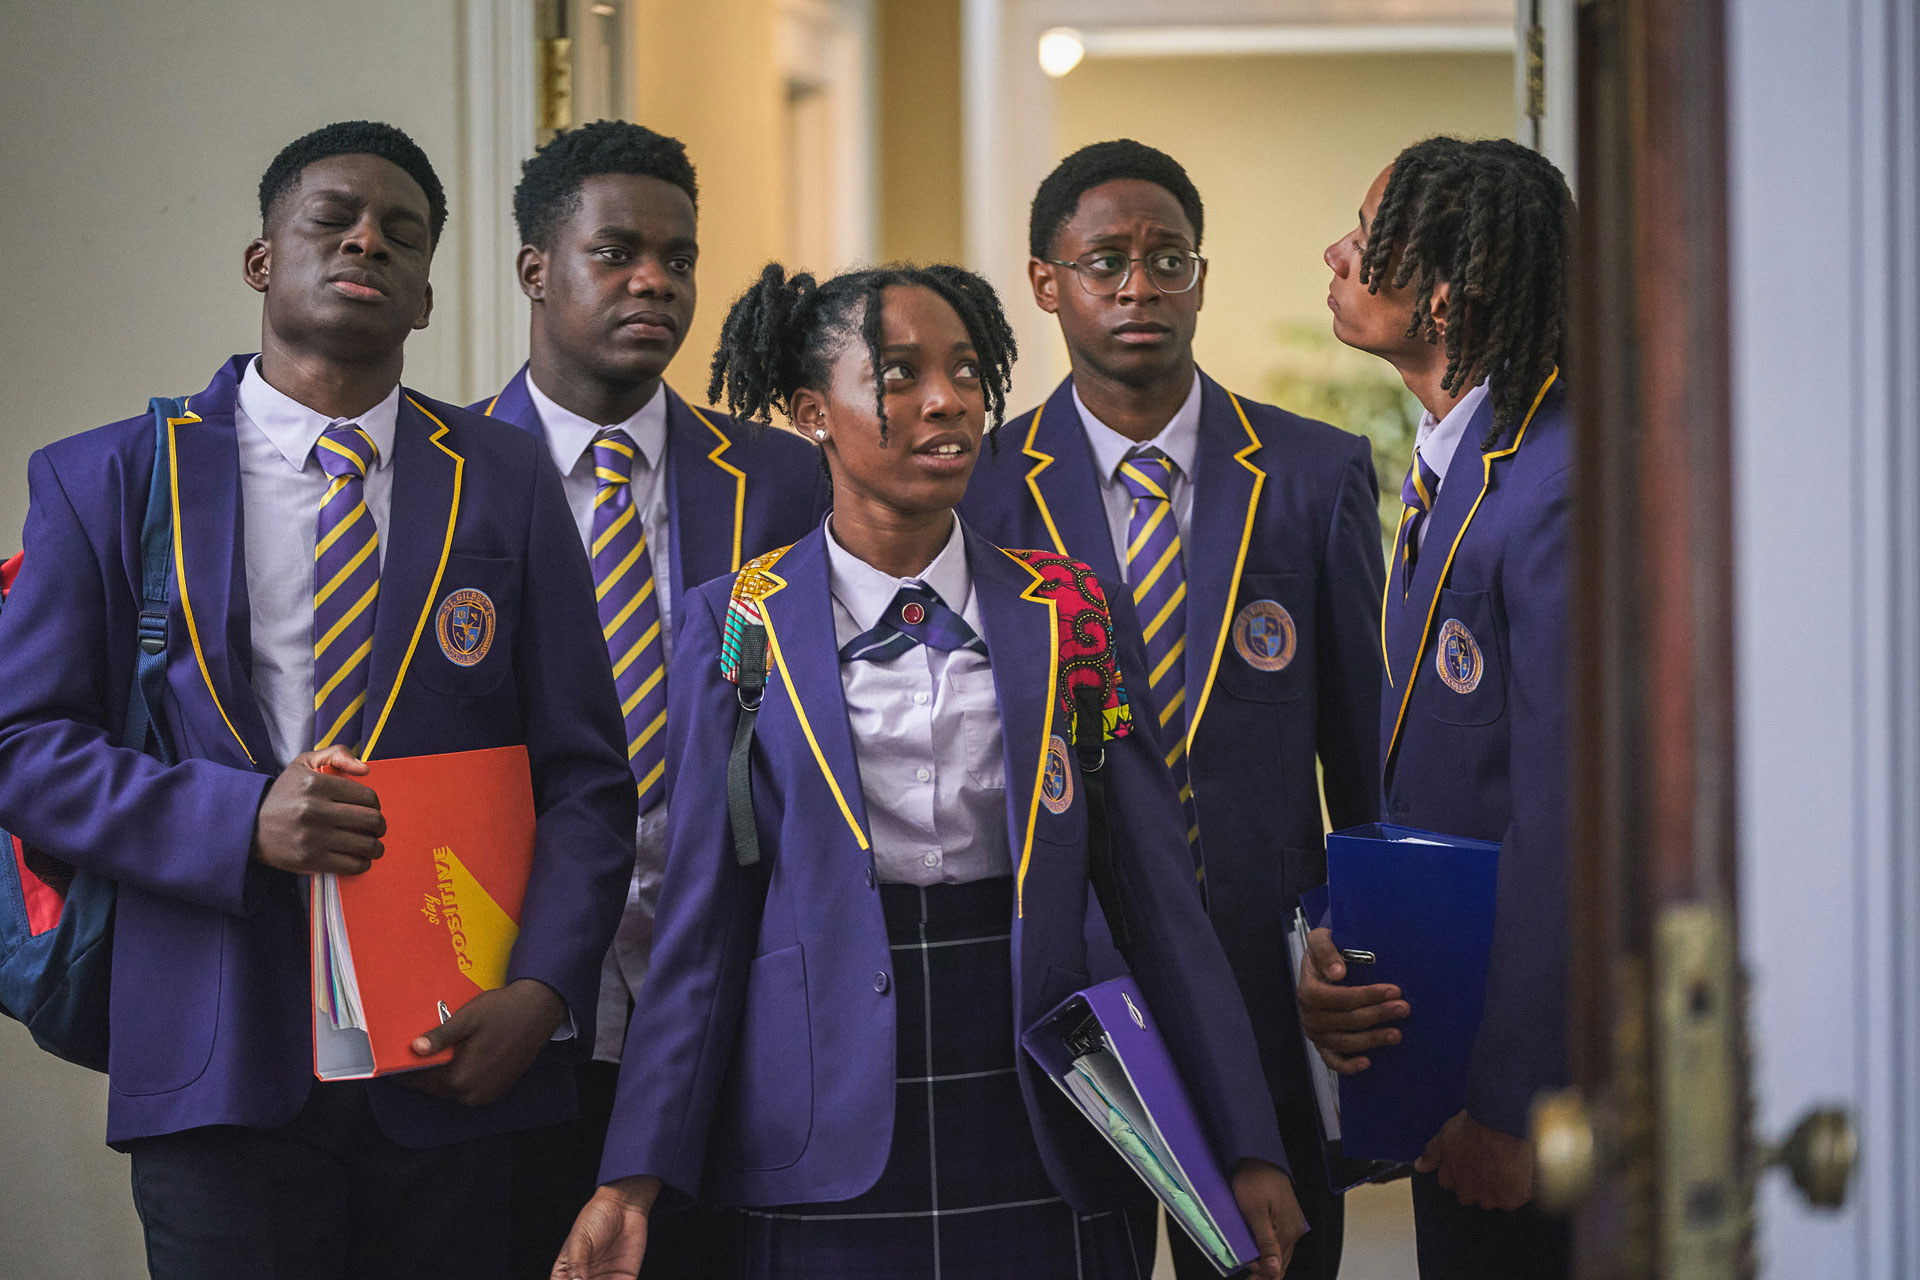 Boarders: The BBC’s New Coming-Of-Age Drama Drops Soon